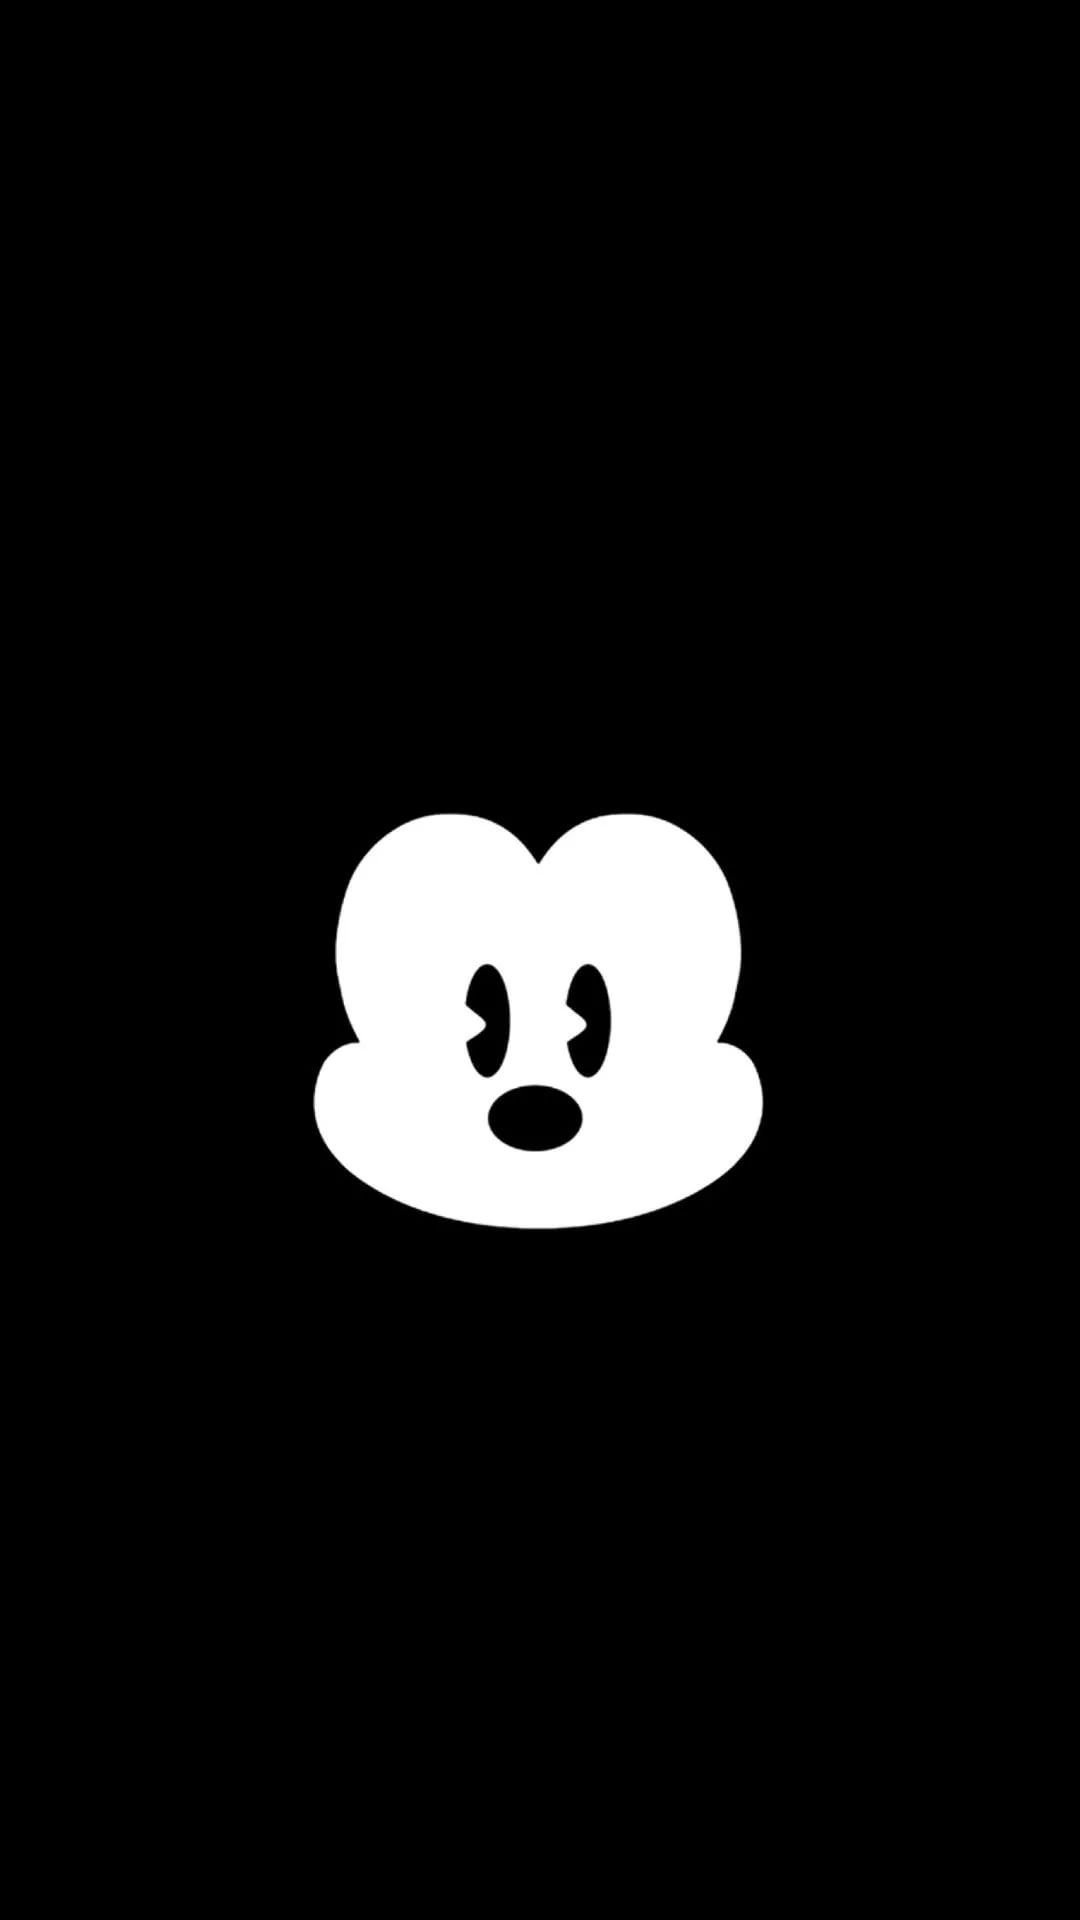 Mickey Mouse iPhone 5 wallpaper